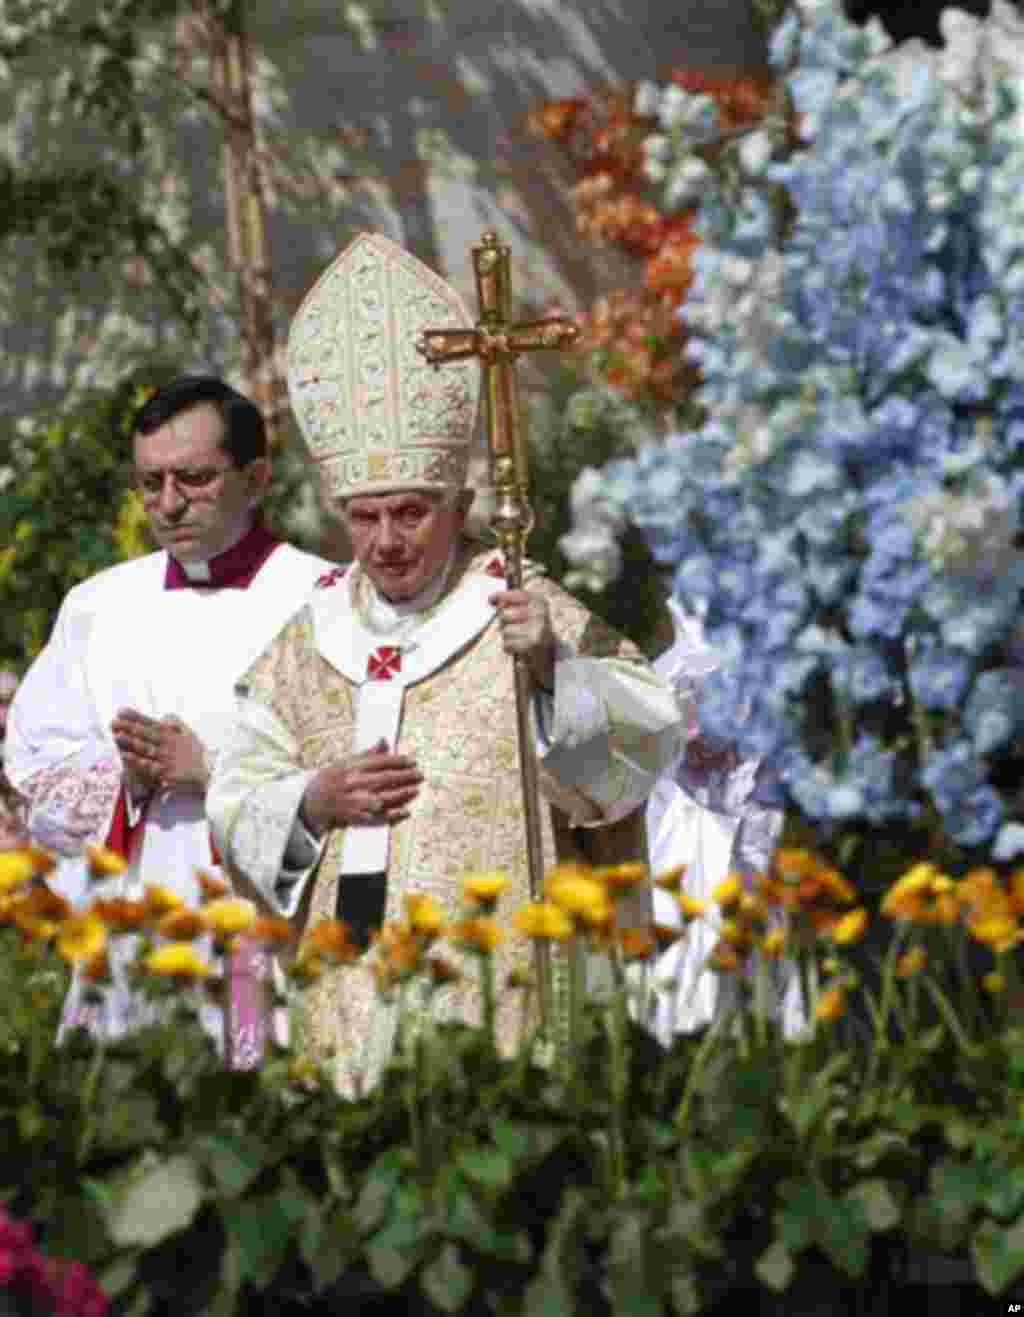 Pope Benedict XVI, arrive at the altar to celebrate the Easter Mass in St. Peter's Square at the the Vatican, Sunday, April 8, 2012. Pope Benedict XVI is celebrating Easter Sunday Mass in sun-drenched, flower-adorned St. Peter's Square, before tens of tho